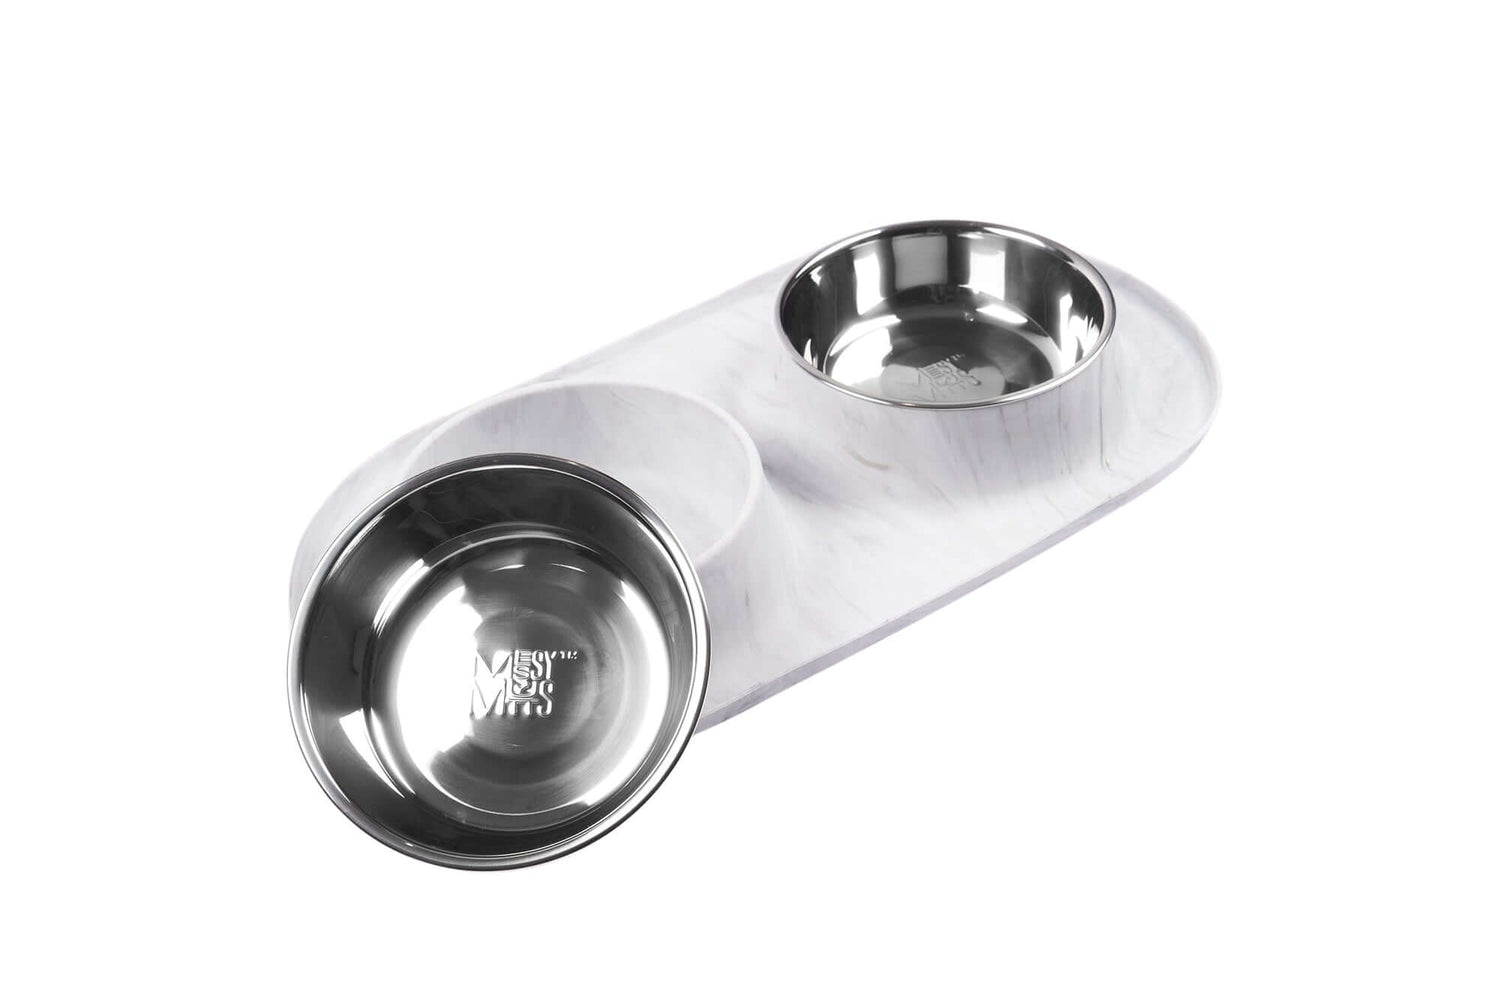 Marble look double dog diner.  Removable stainless steel bowls.  Non slip design.